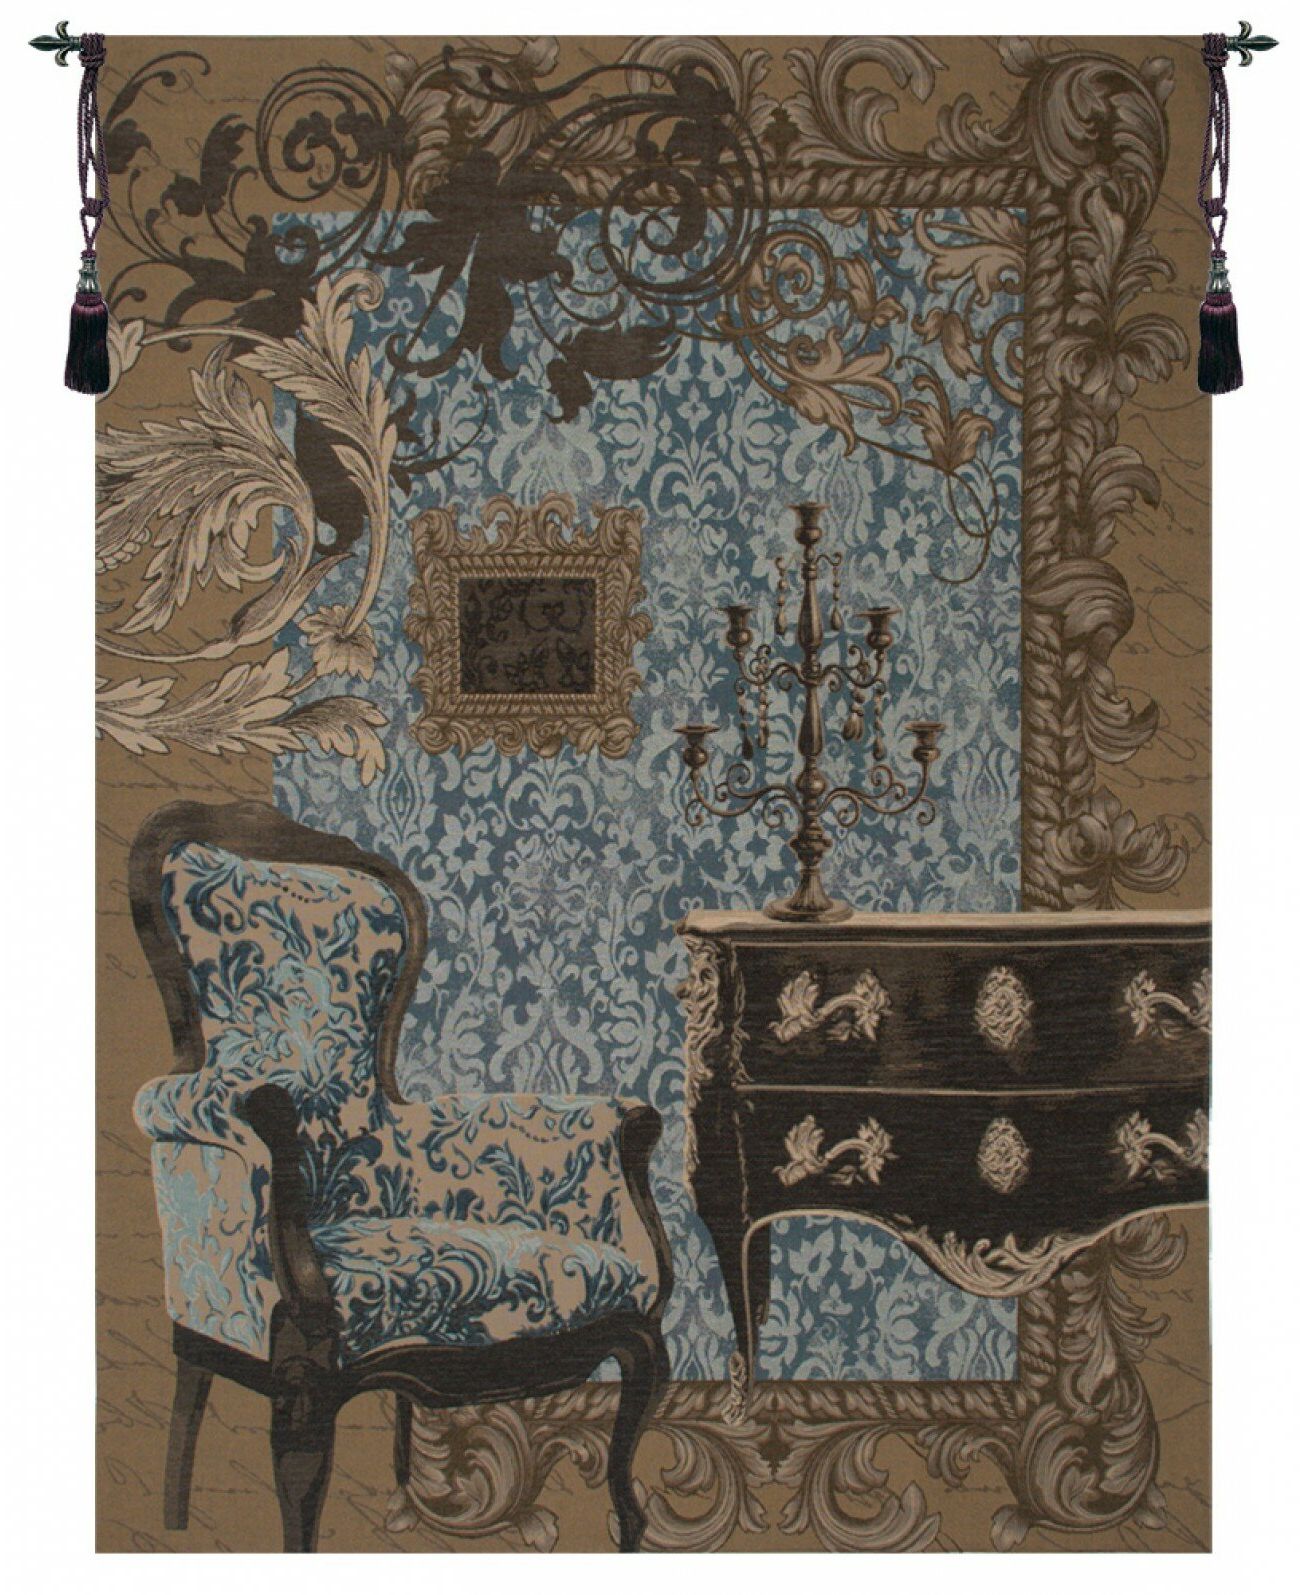 Favorite Blended Fabric Chateau Bellevue European Tapestries Pertaining To Mobilier Louis Xvi European Tapestry (View 8 of 20)